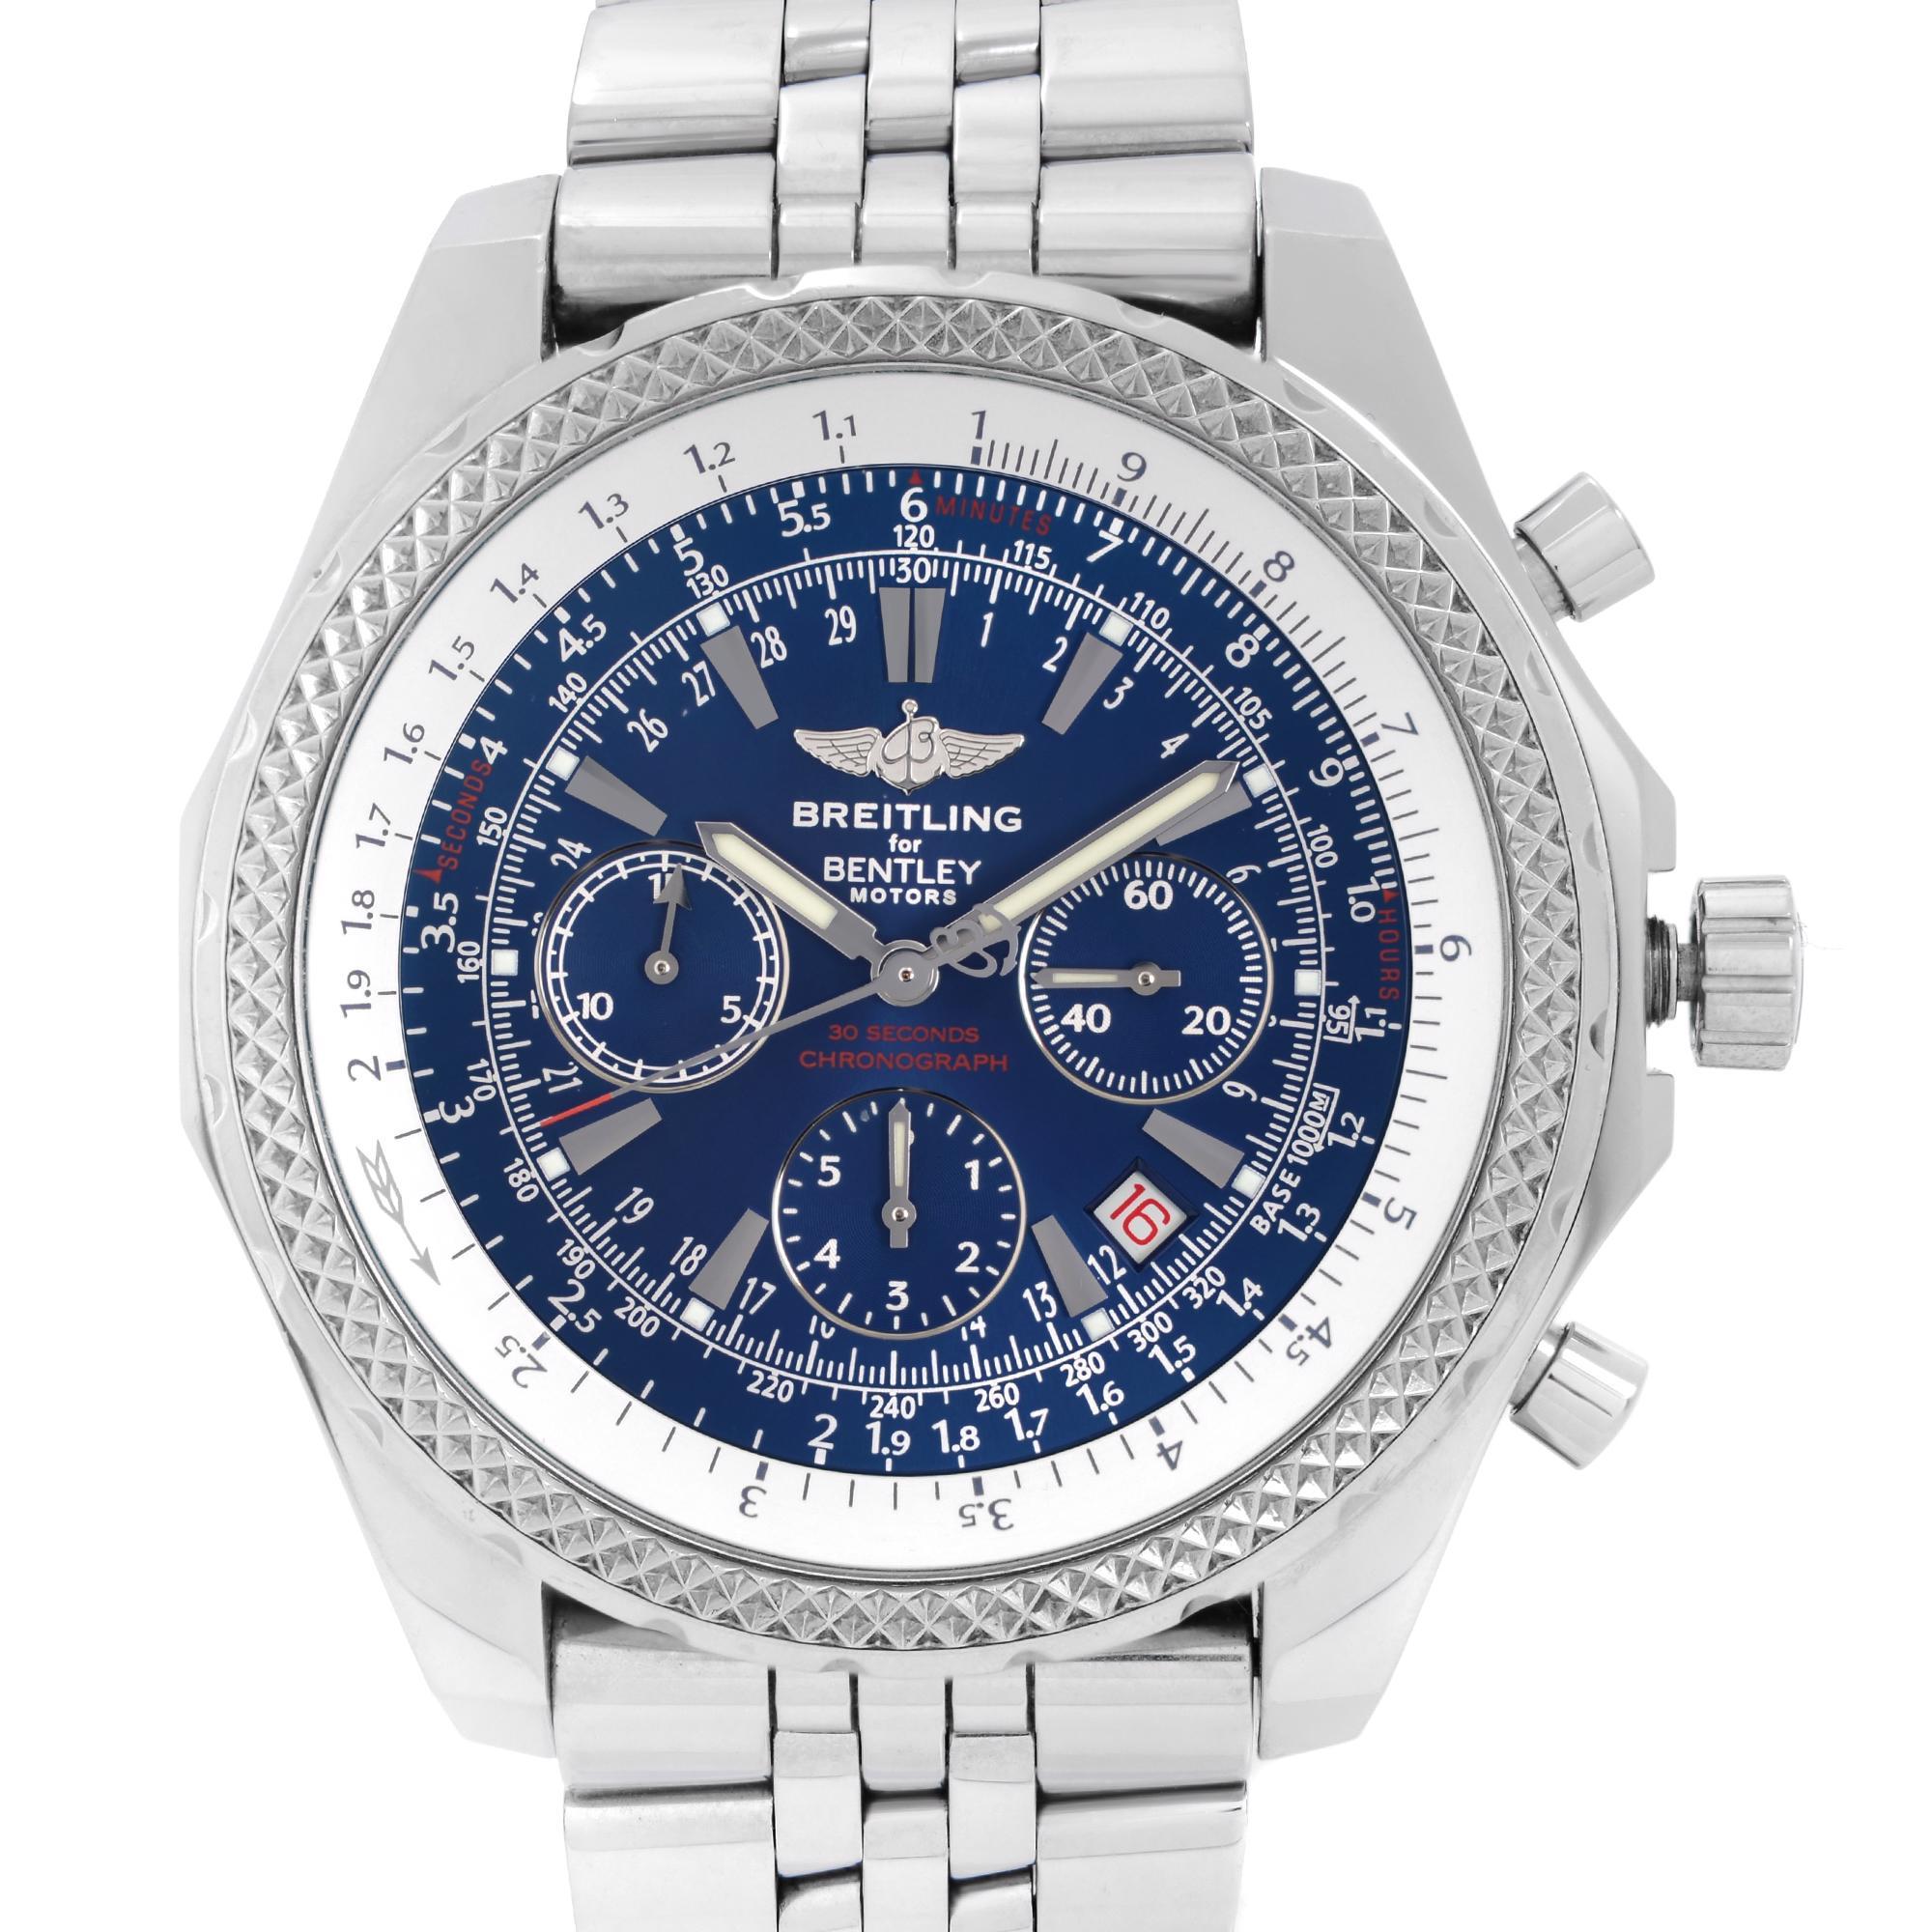 Pre-owned Breitling Bentley Motors Chronograph Stainless Steel Blue Dial Automatic Watch A2536212.C618. This Beautiful Timepiece is Powered by an Automatic Movement and Features: Stainless Steel Case & Bracelet Bidirectional Rotating Stainless Steel